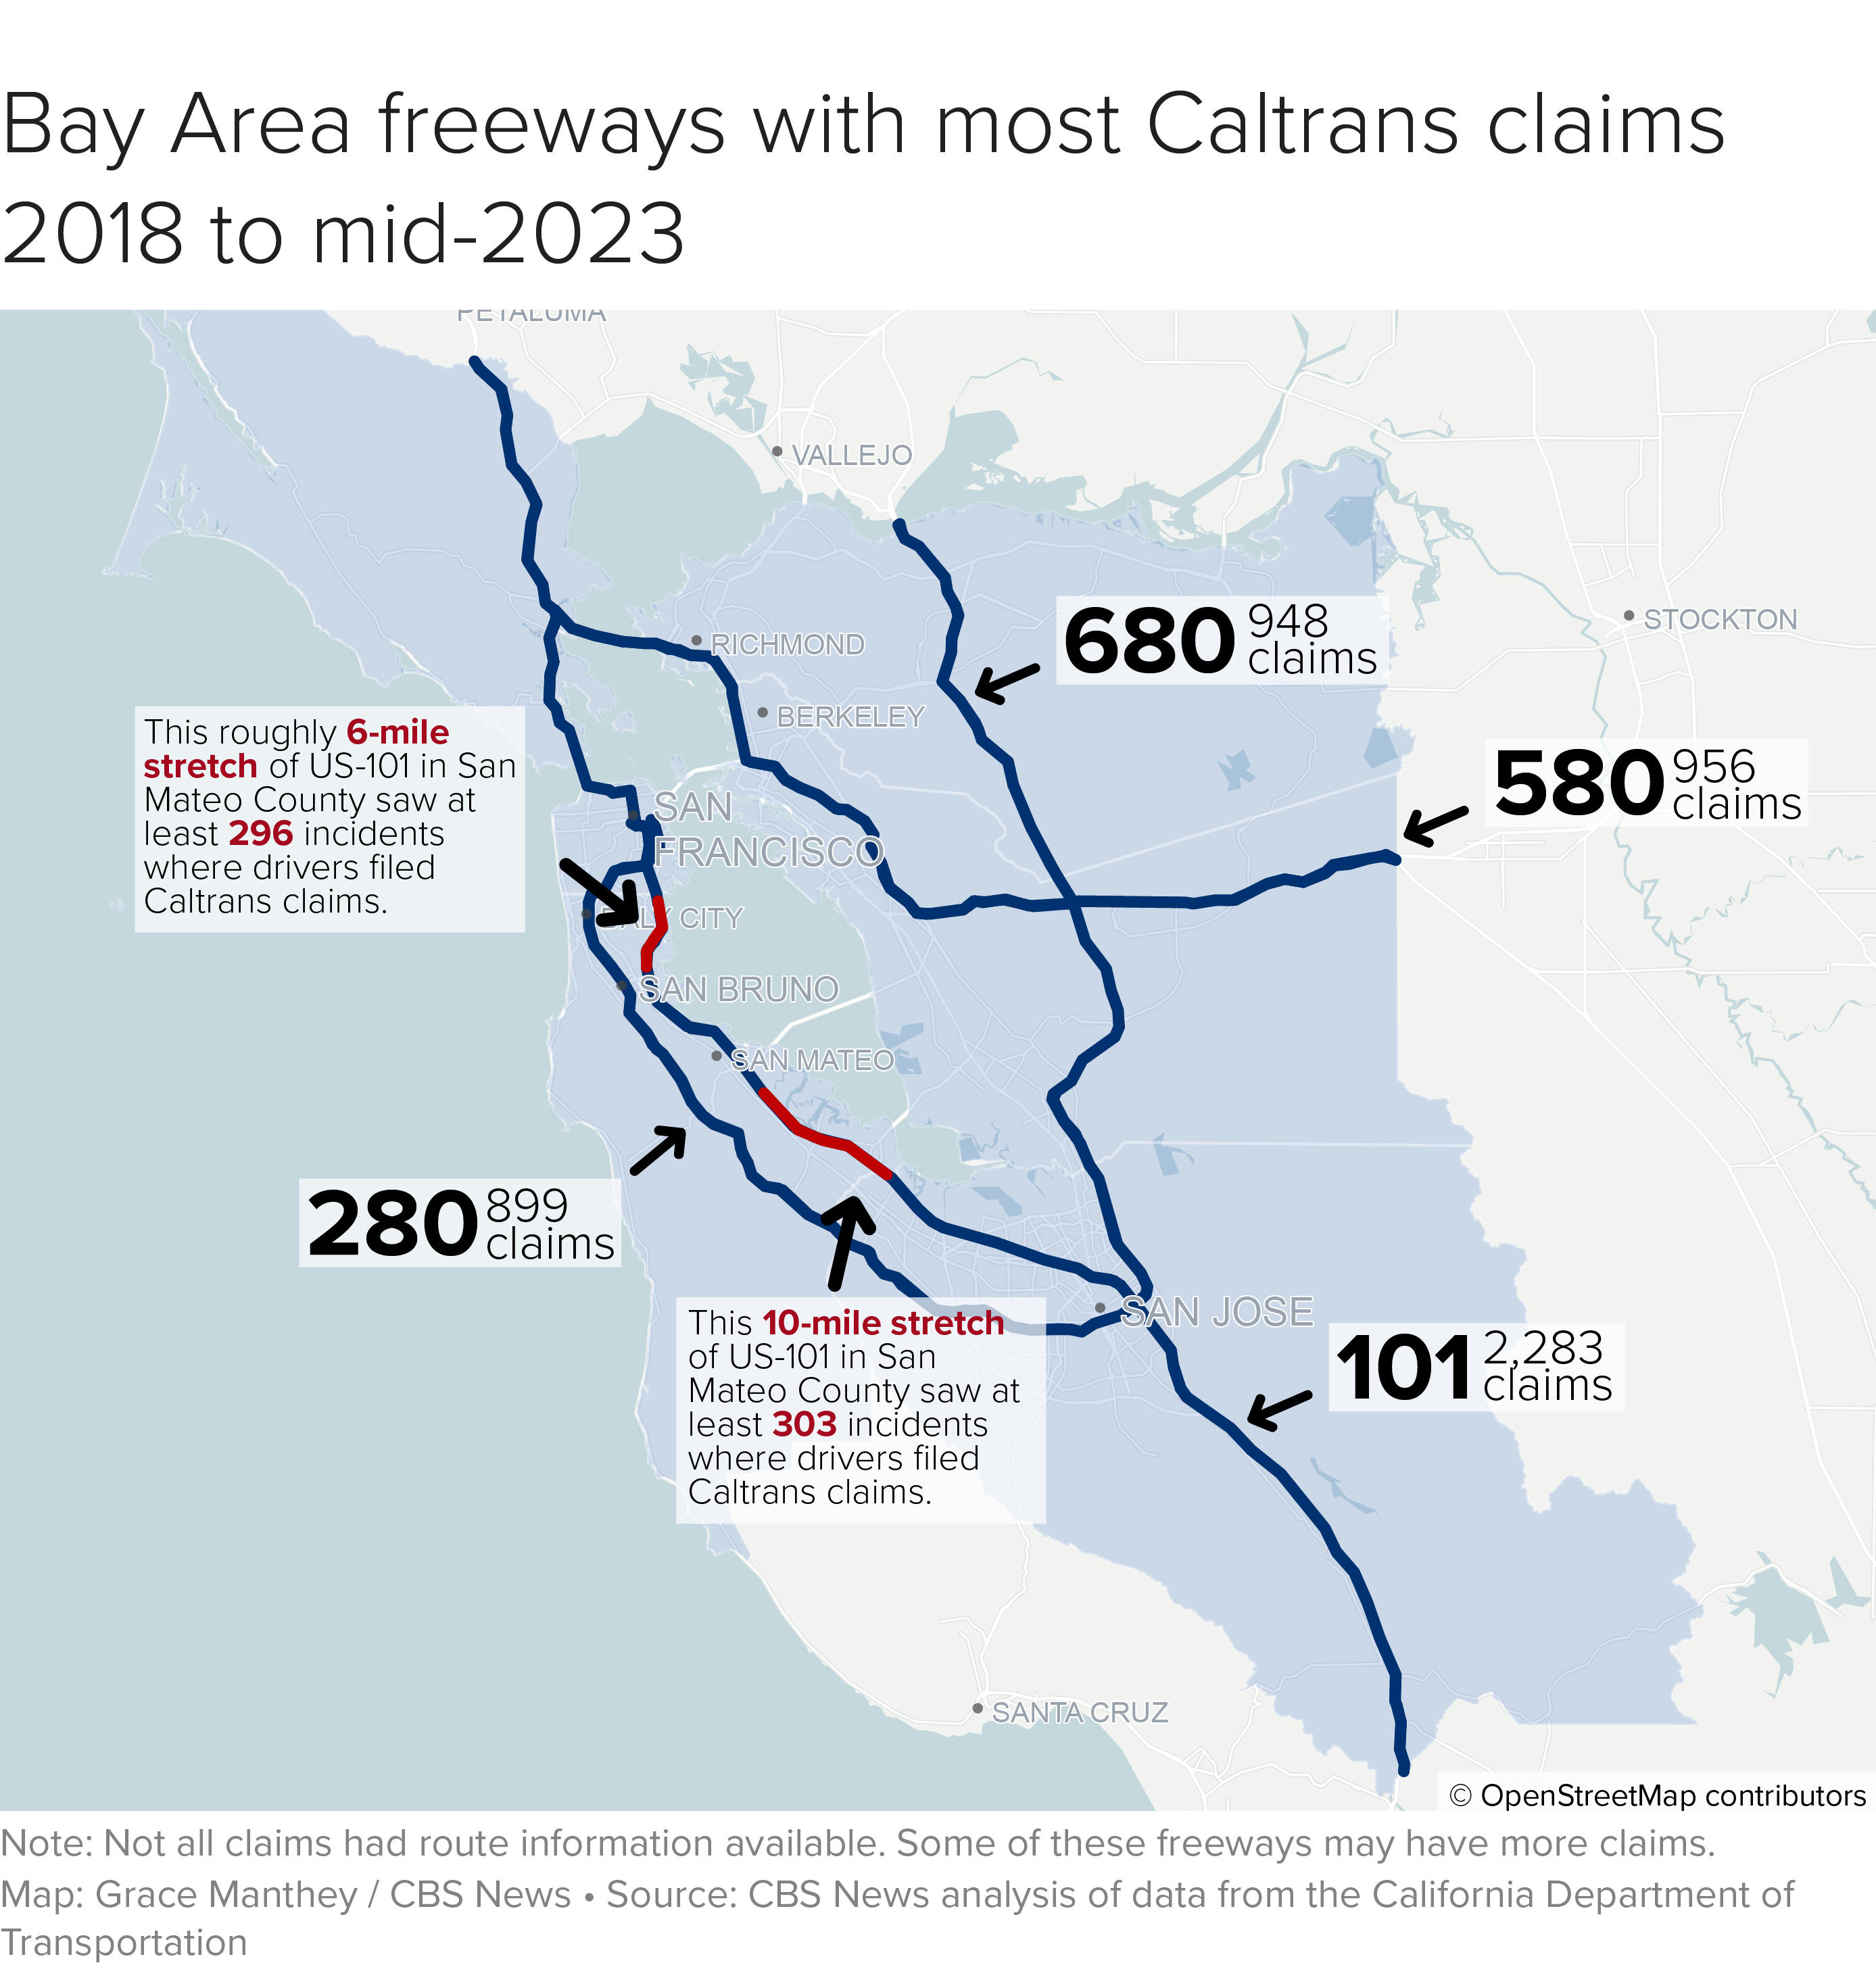 In the Bay Area, the 101 had the most incidents resulting in claims with more than 2,000. The most incidents on the 101 happened between East Palo Alto and redwood shores, South San Francisco and Brisbane and a 10-mile stretch from the San Jose airport through Mountain View. There were also a lot of claims on 580 and 680 and 280. 